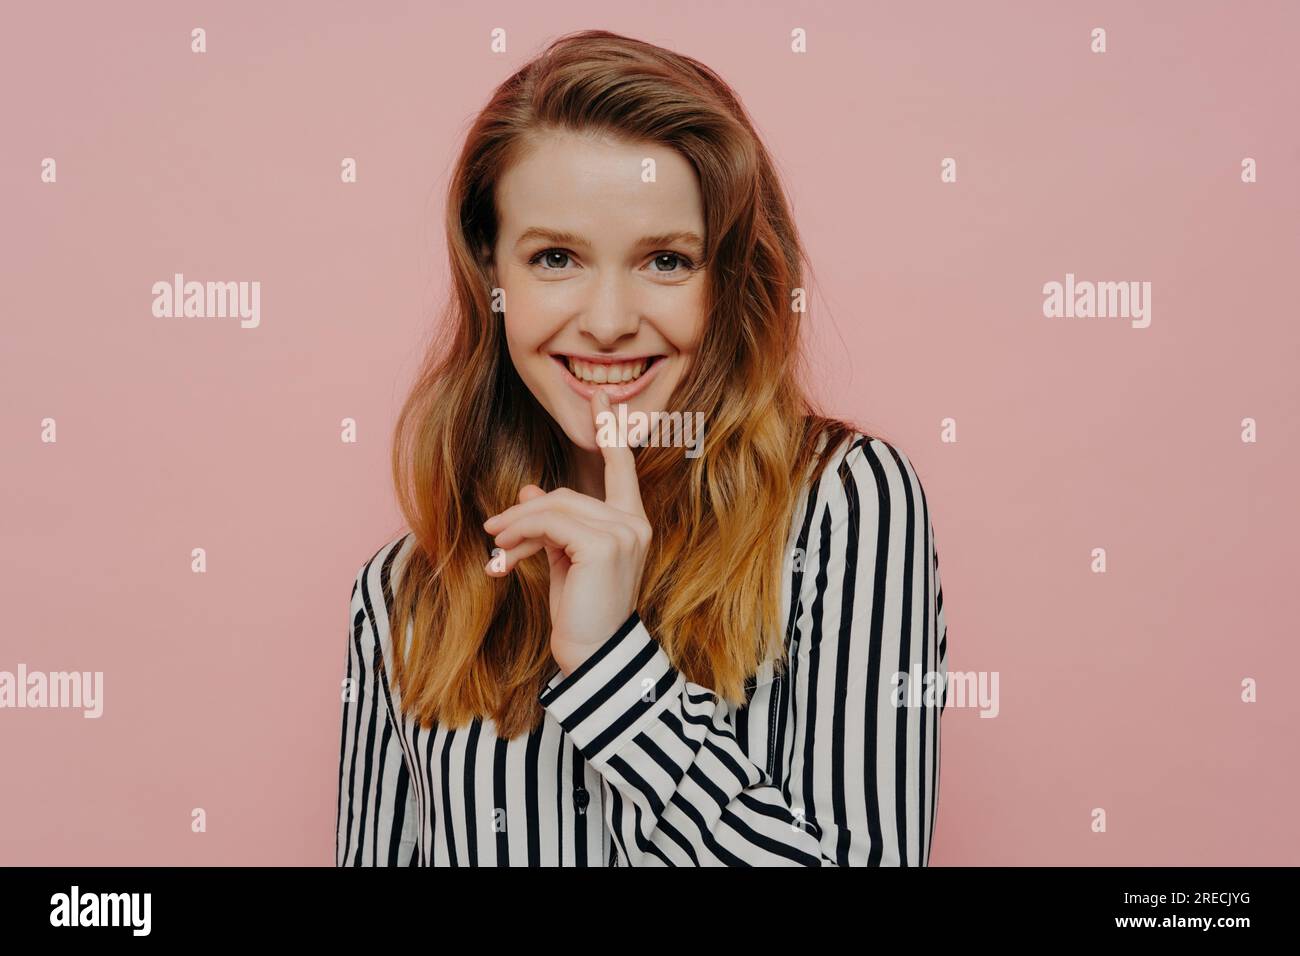 Beautiful, happy young woman in stripy black and white blouse, touching lips with pointer finger, posing in studio on light pink background. Stock Photo